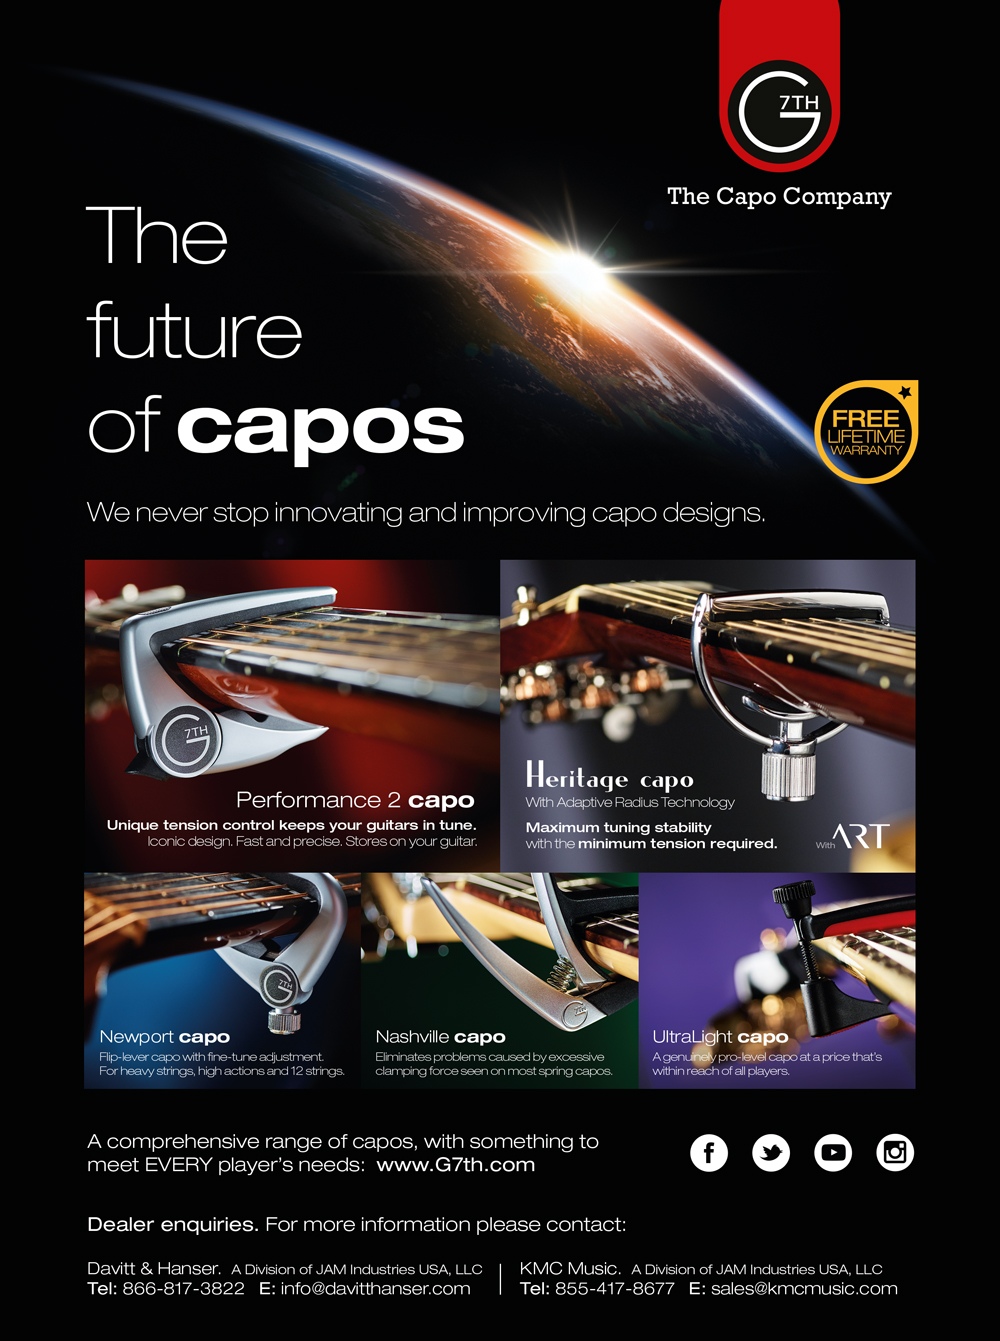 The Future of Capos, full page